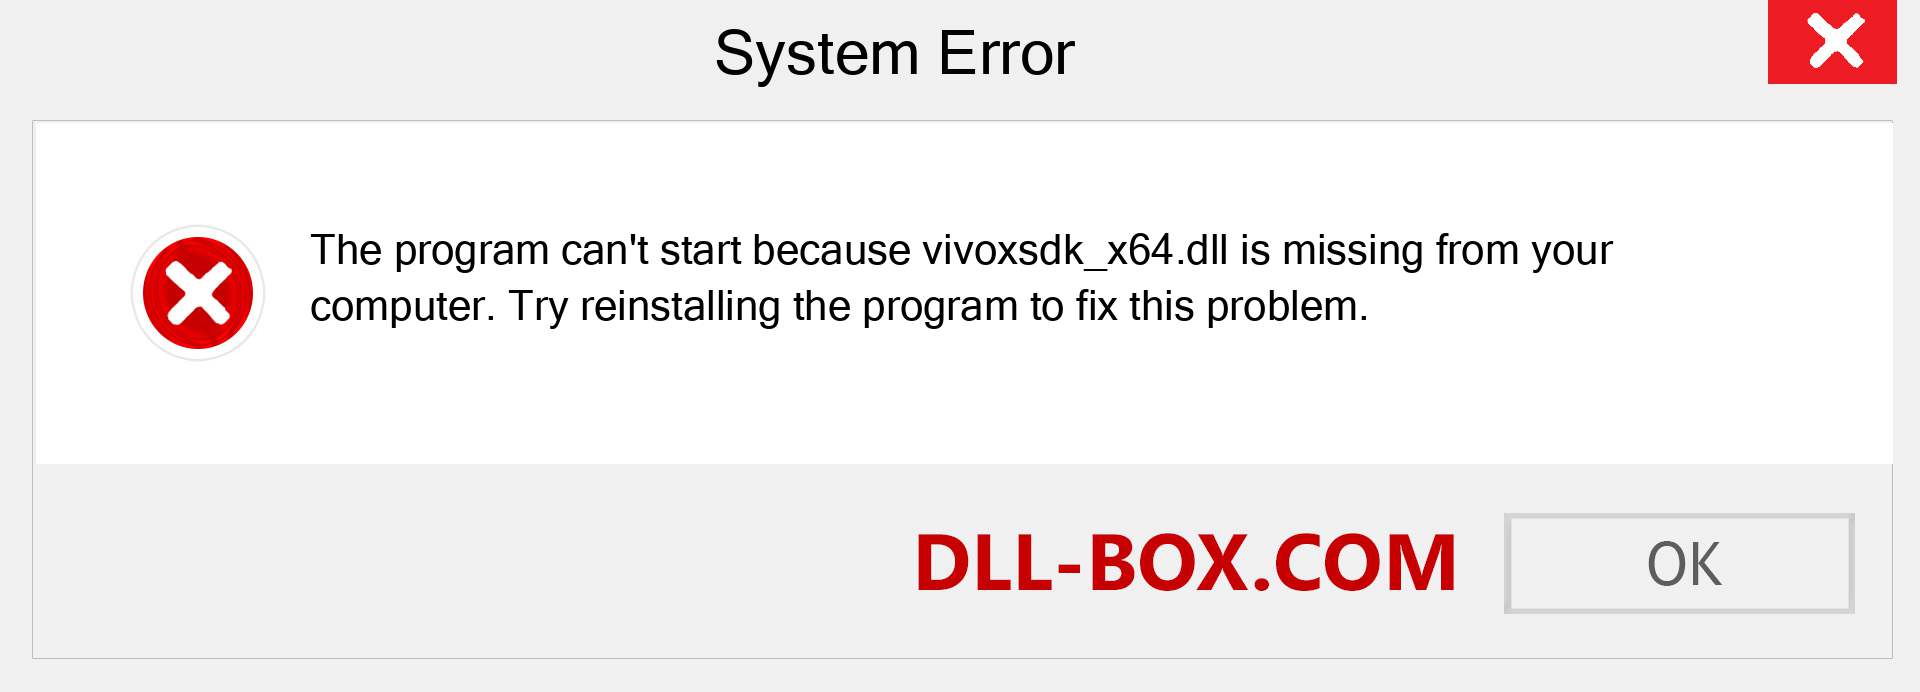  vivoxsdk_x64.dll file is missing?. Download for Windows 7, 8, 10 - Fix  vivoxsdk_x64 dll Missing Error on Windows, photos, images